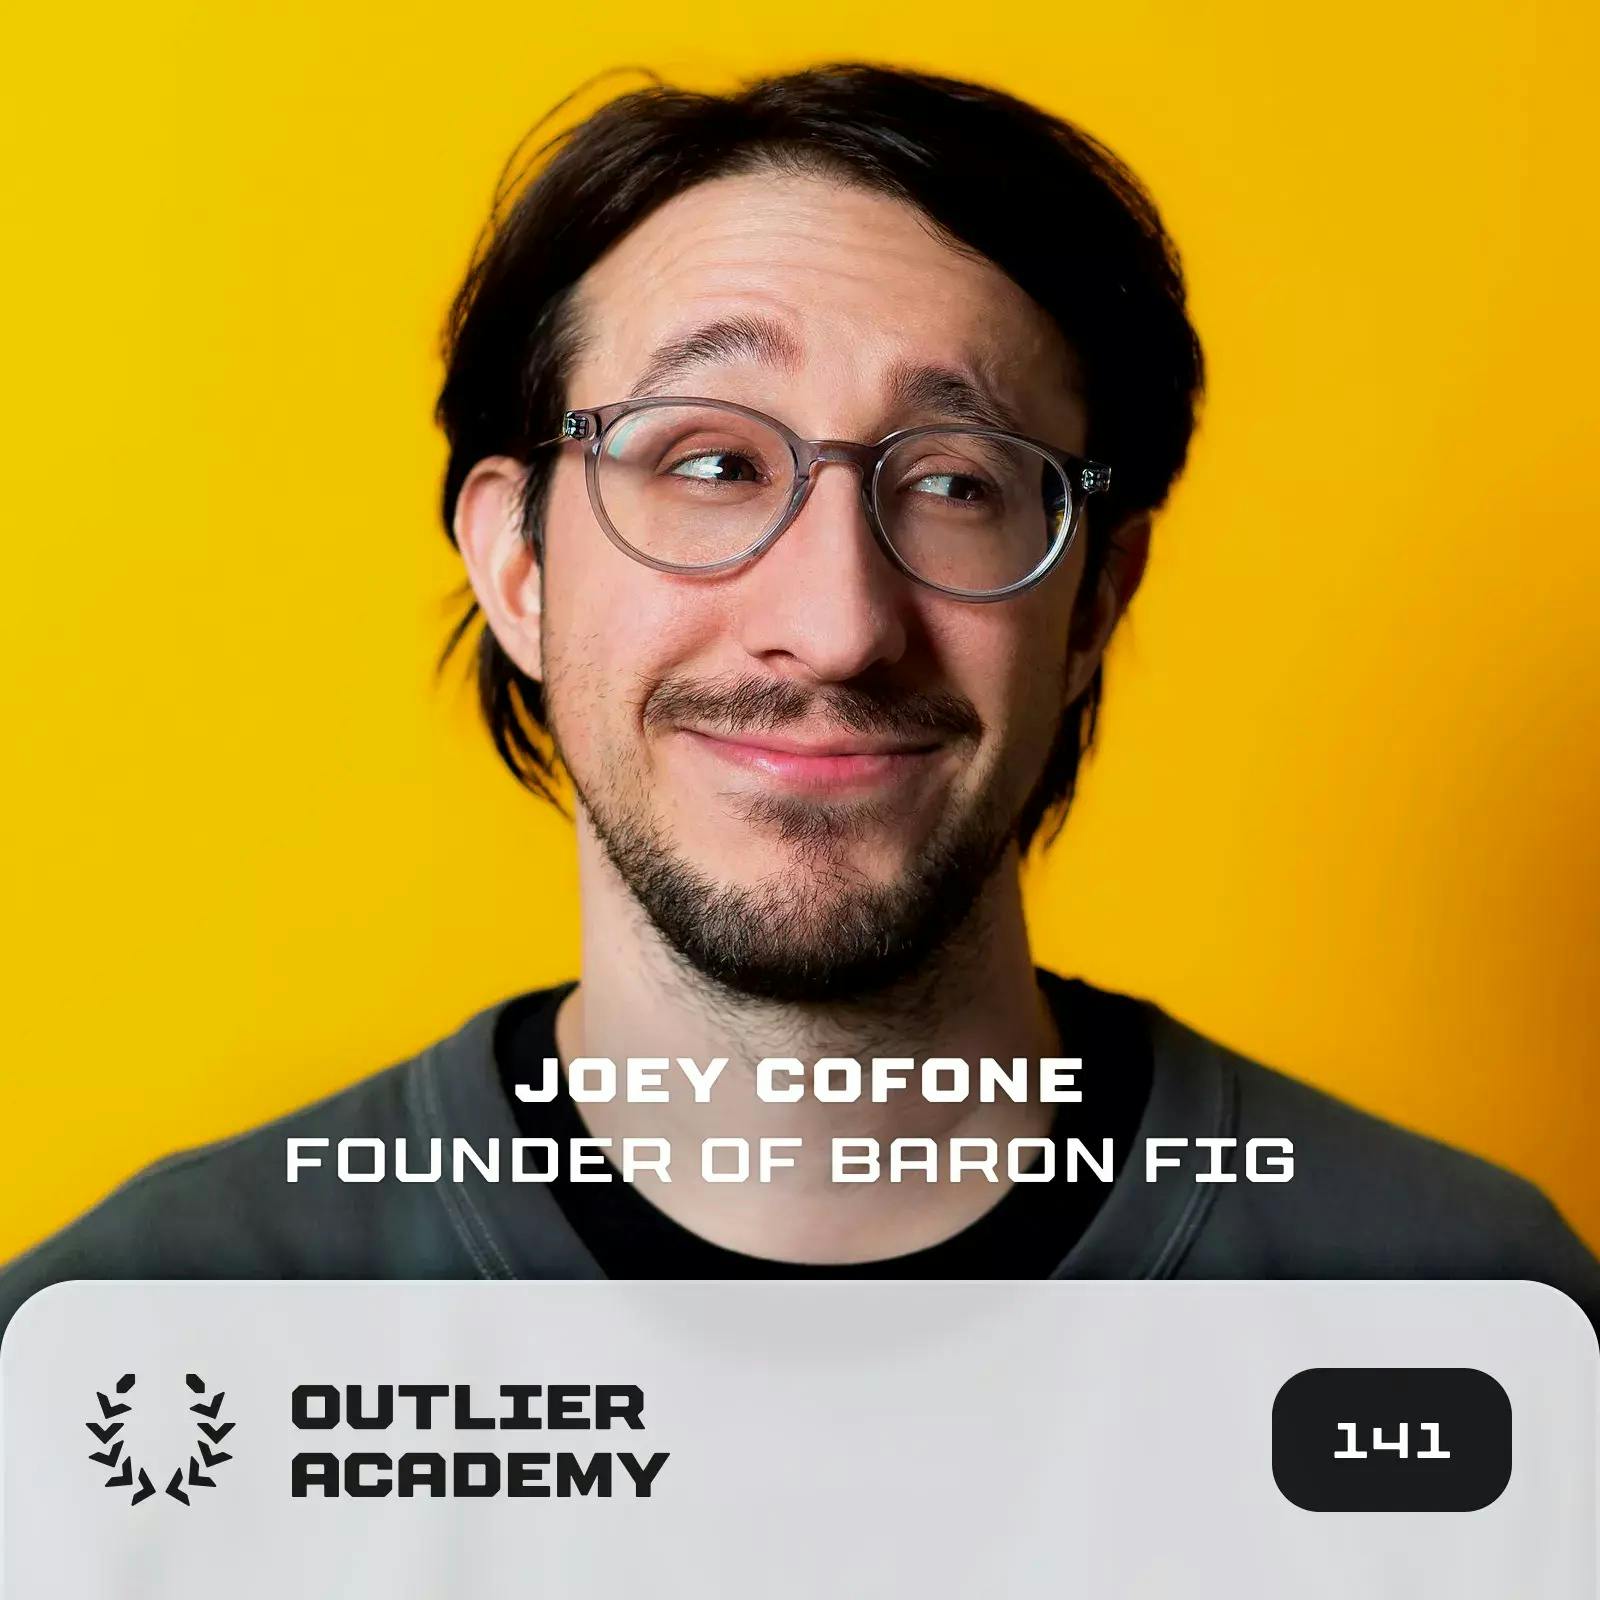 Trailer - Joey Cofone, Founder & CEO of Baronfig - Favorite Baronfig Products, Skill vs Renown, Daily Disciplines, Favorite Books, and More